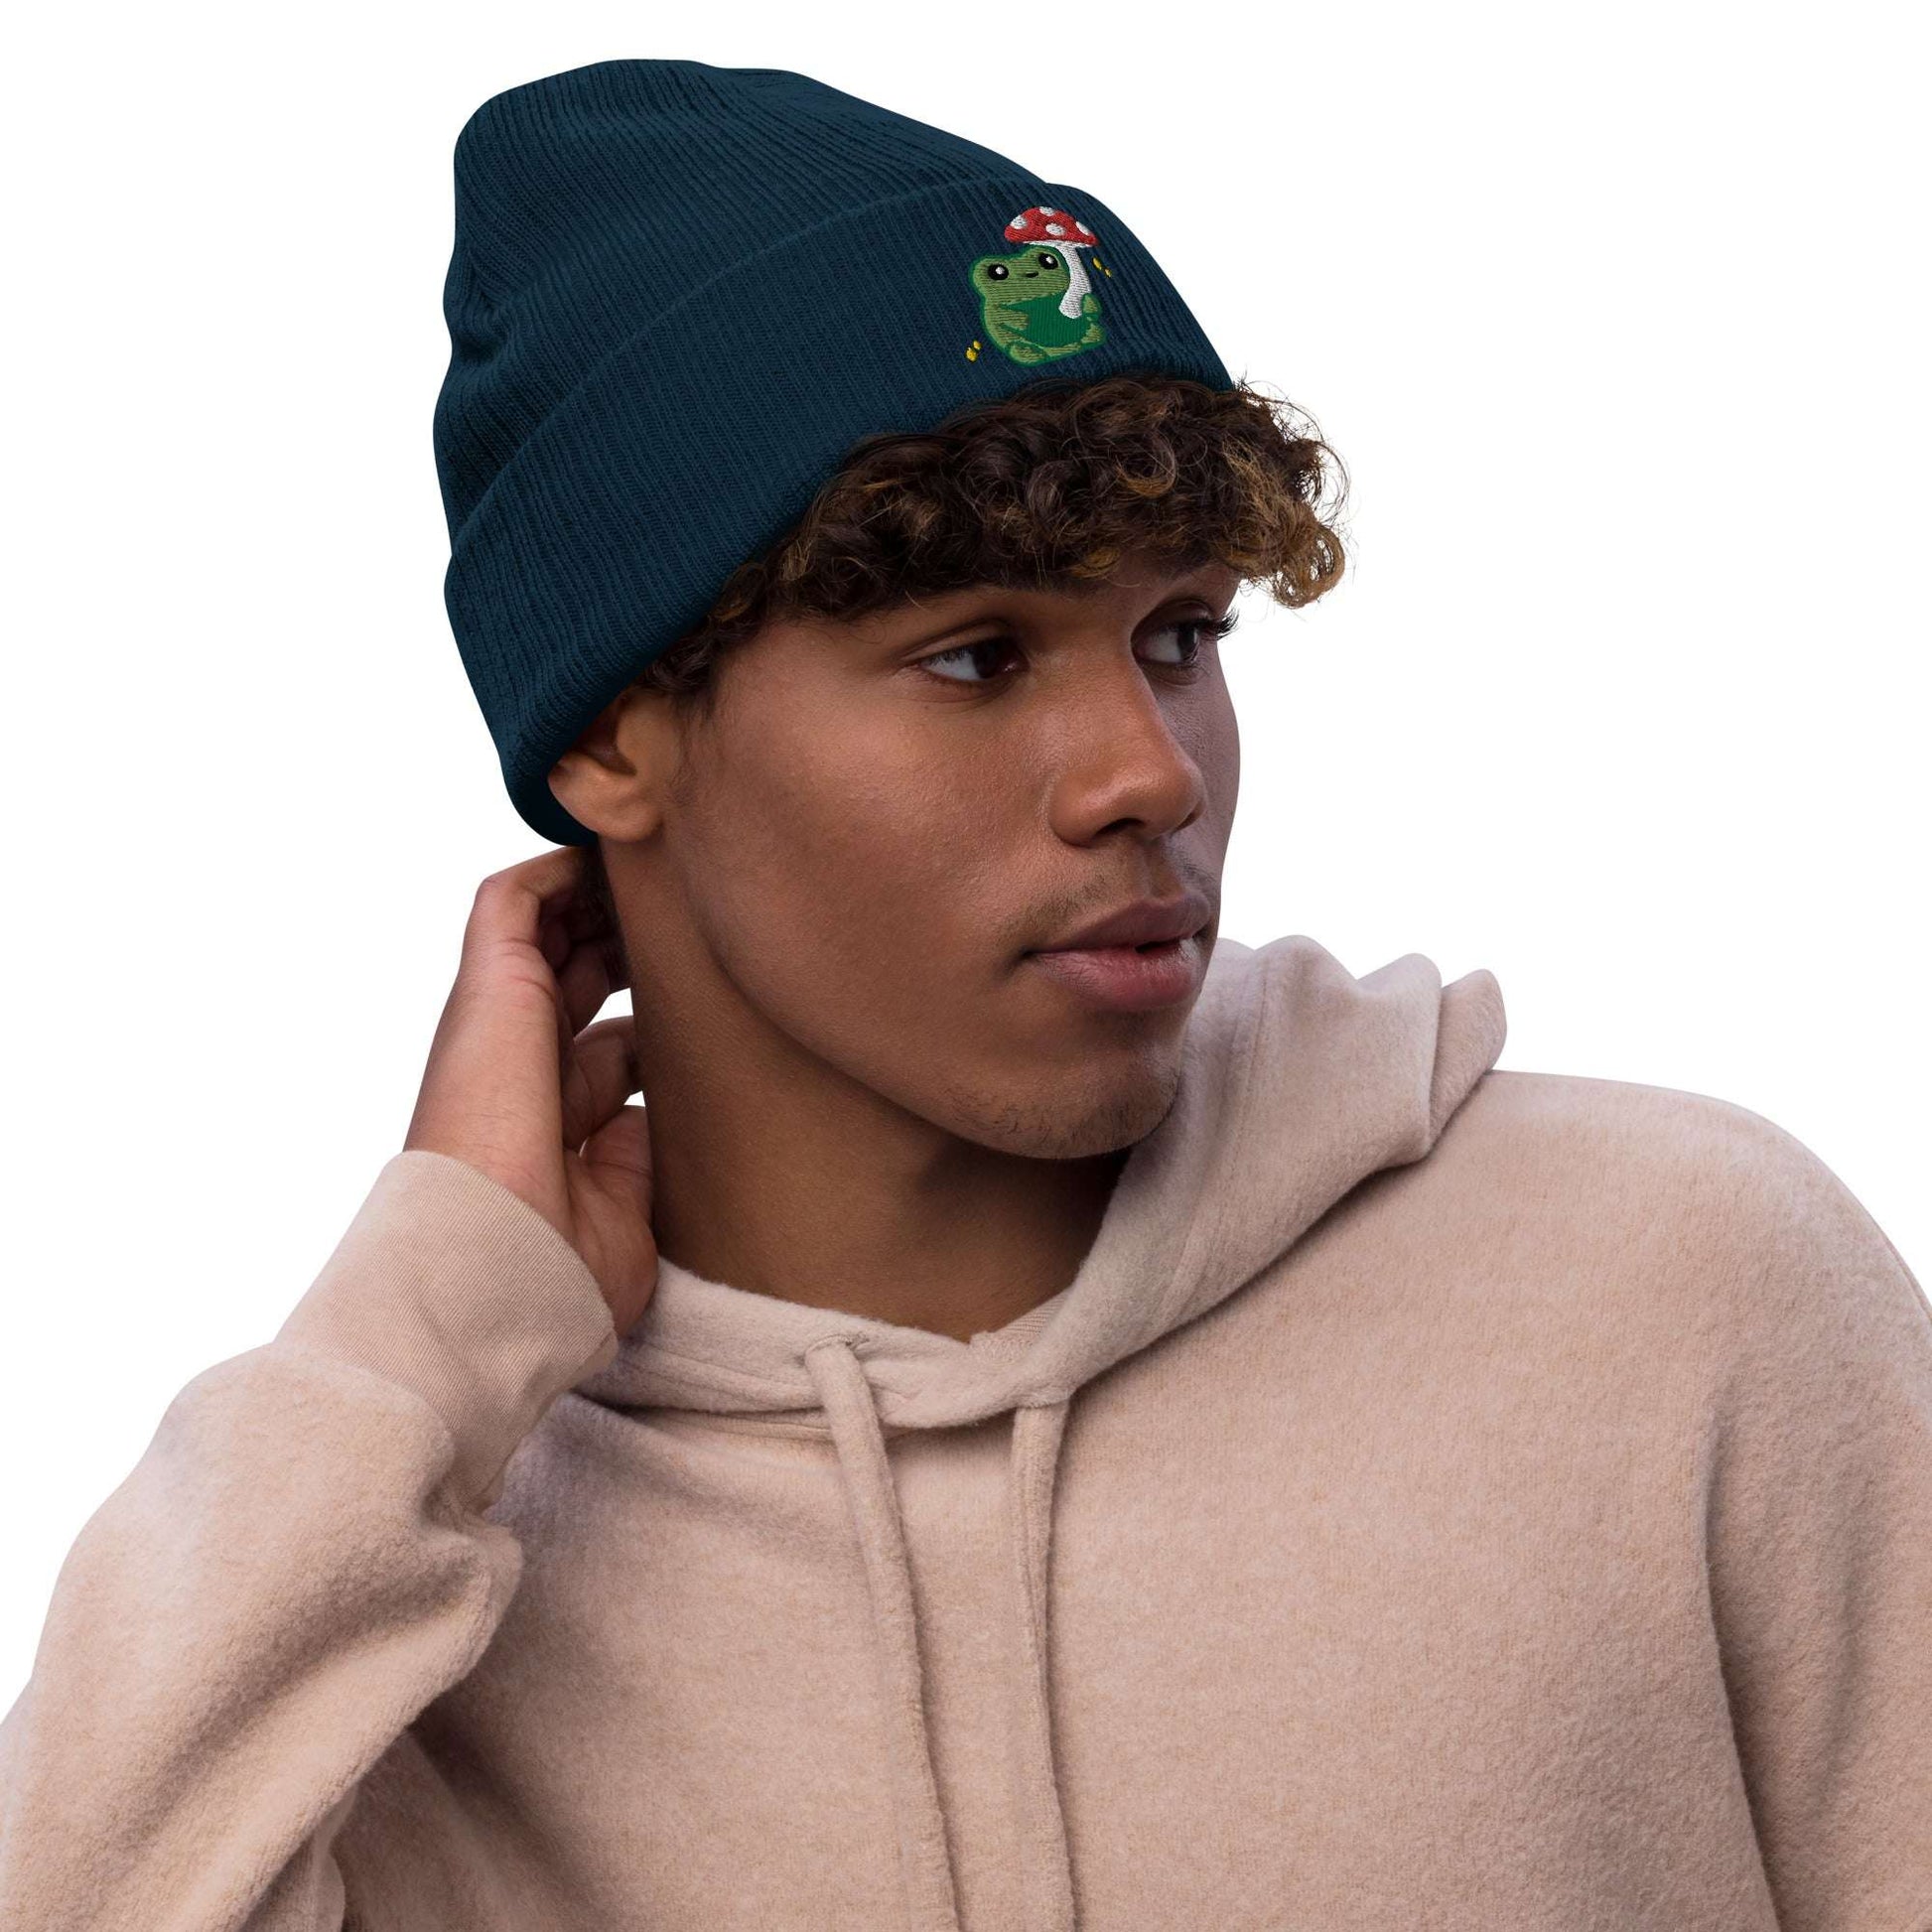 Ribbed Knit Beanie with Cute Embroidered Frog holding a Mushroom Umbrella